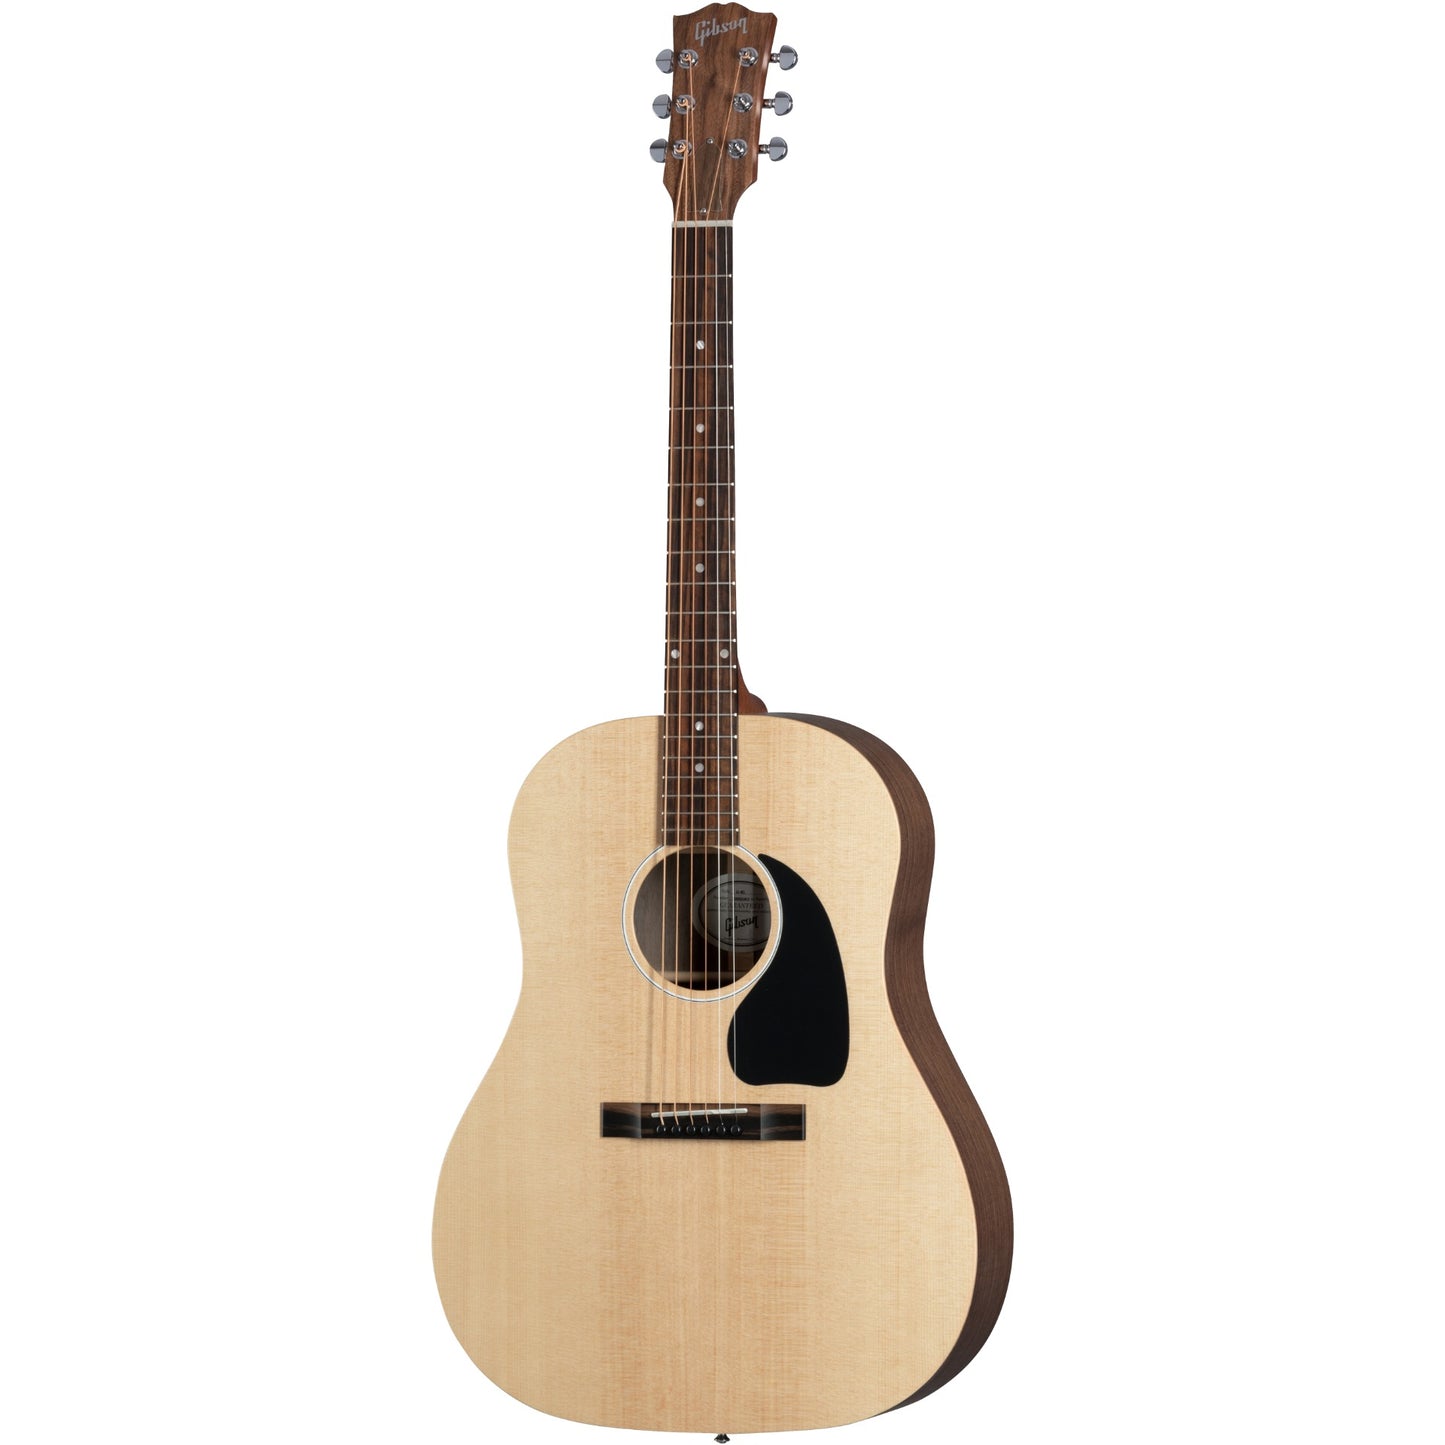 Gibson G-45 Generation Series Acoustic Guitar, Natural